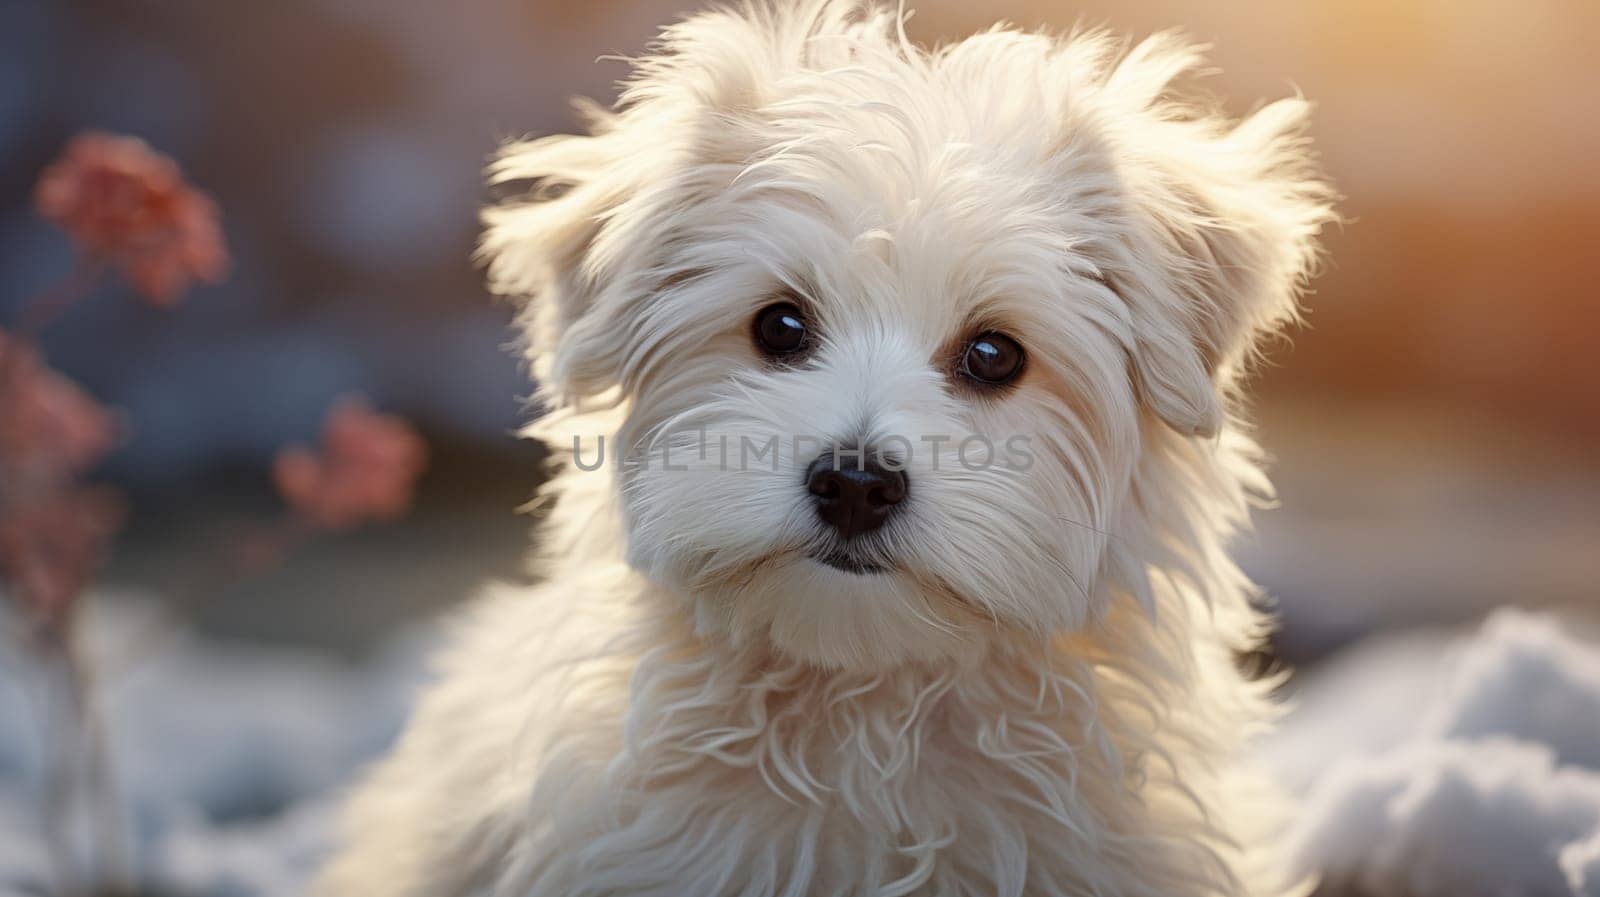 Cute white fluffy puppy in white sweater in snowy park.